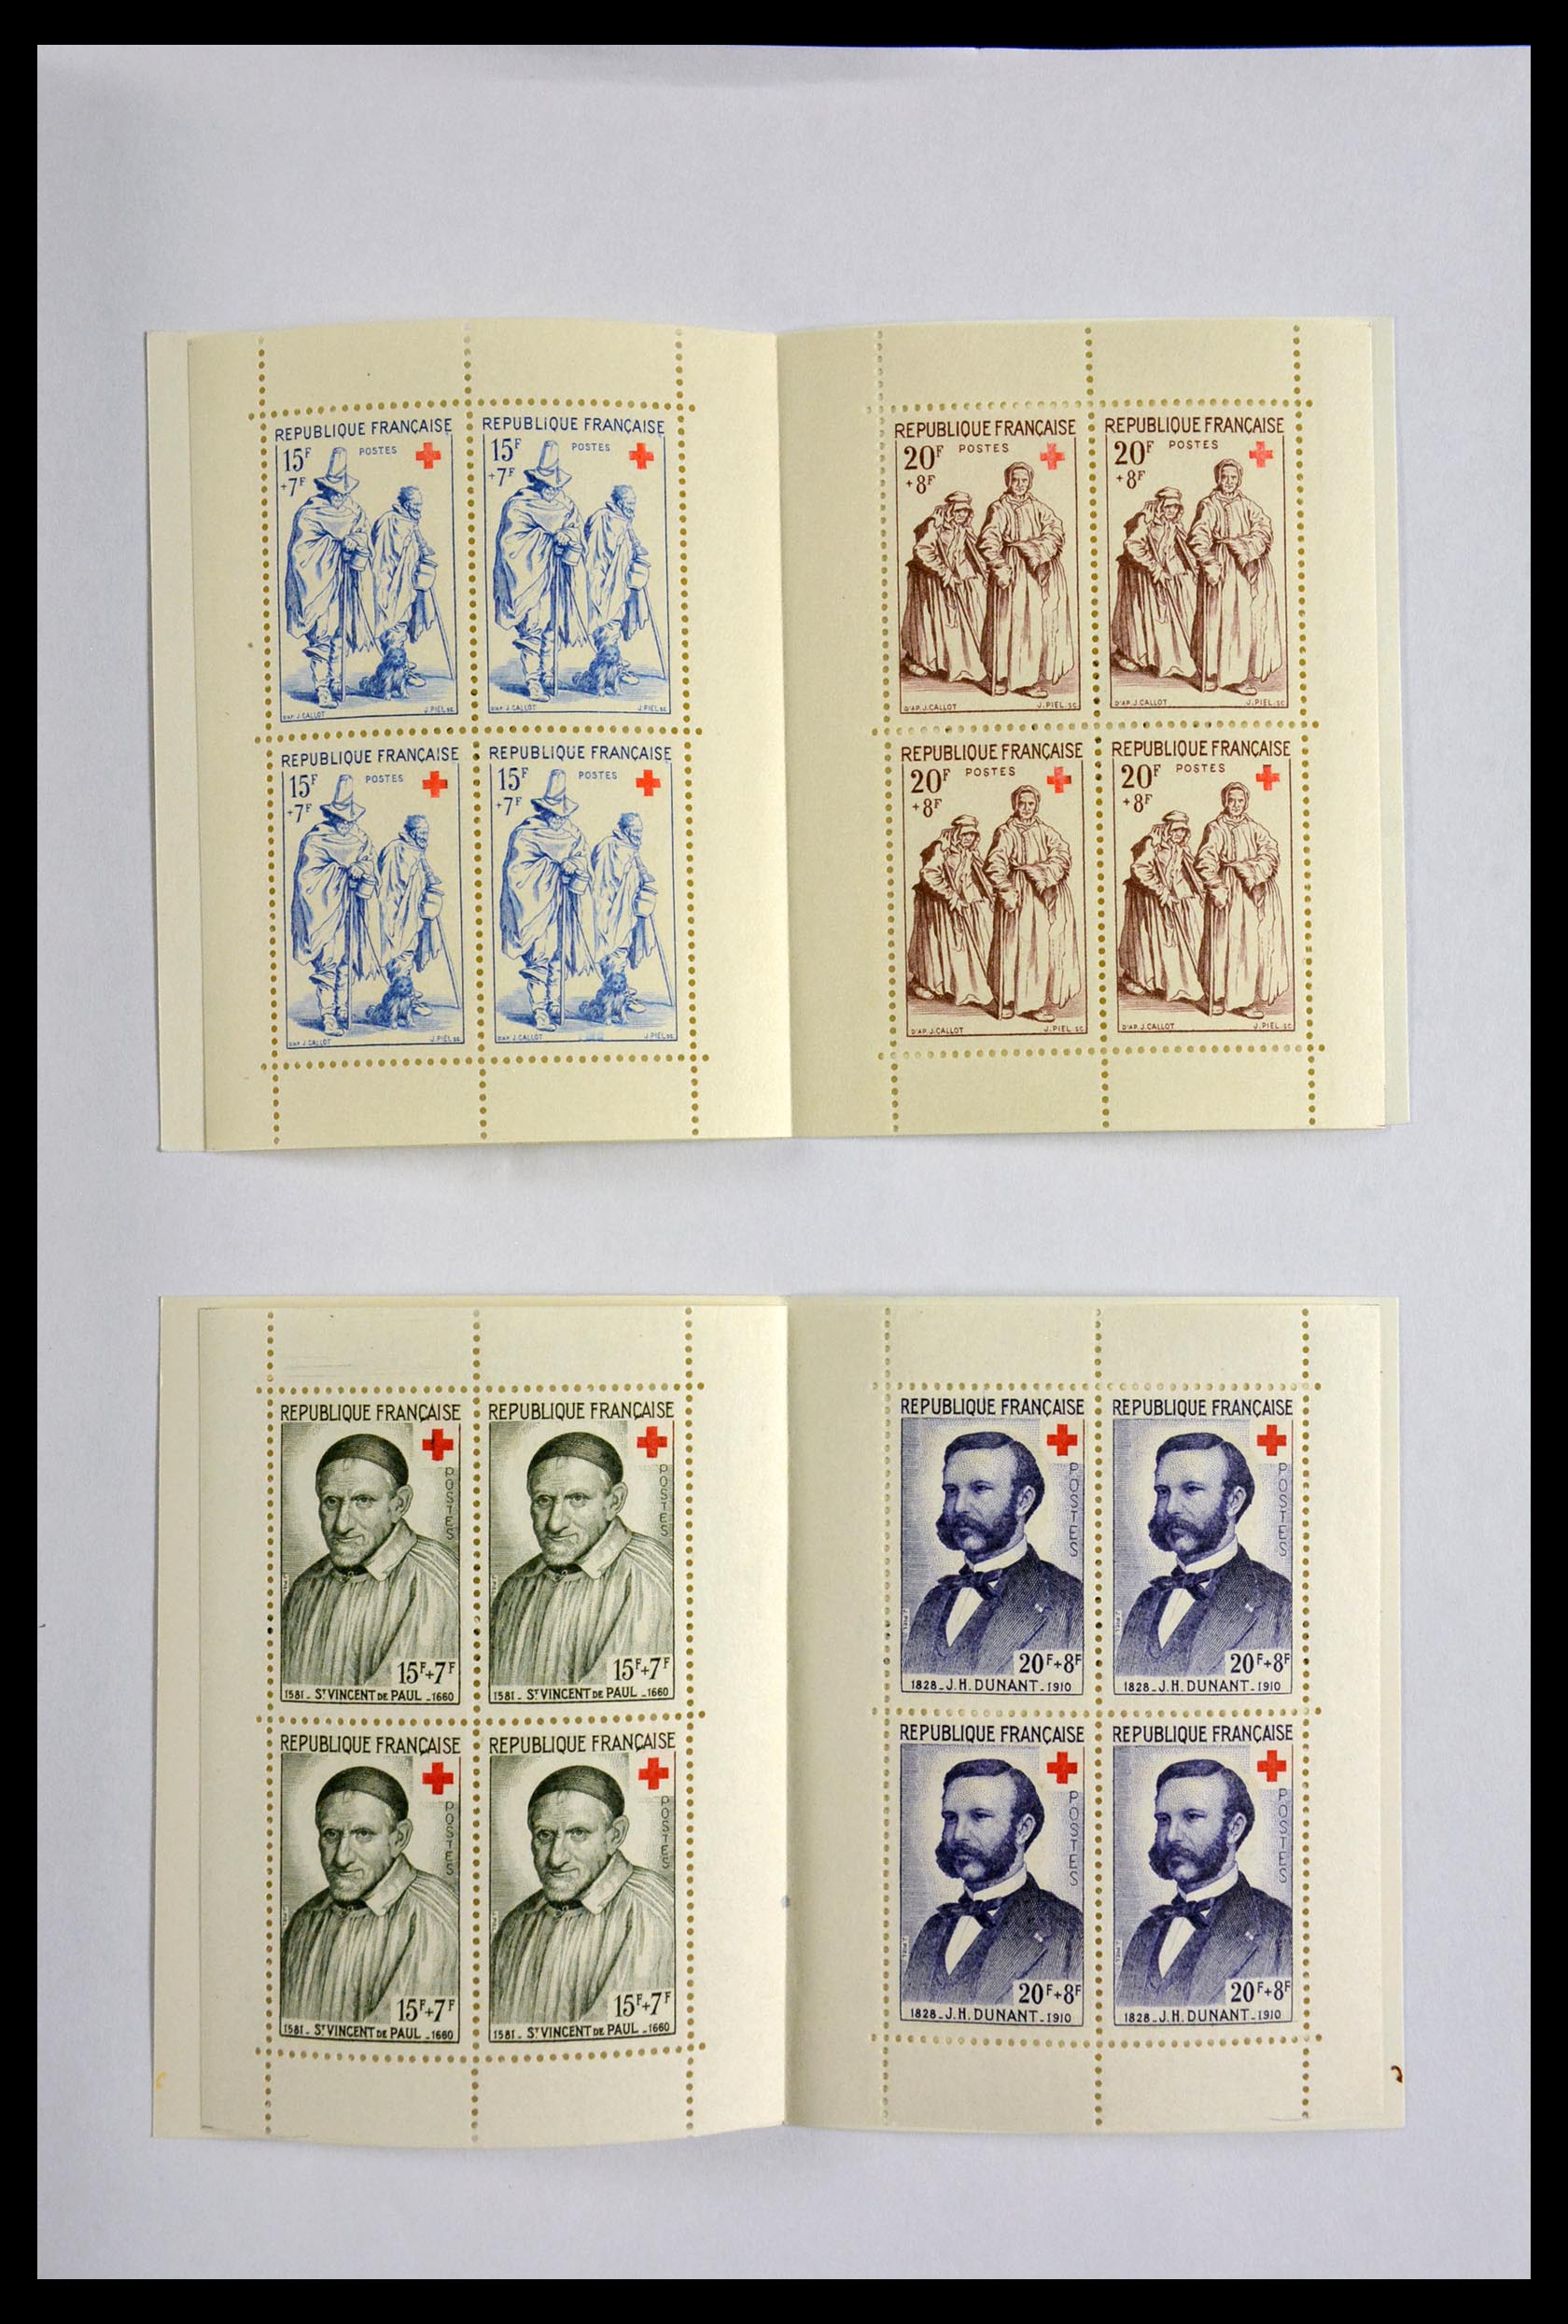 29737 008 - 29737 France Red Cross booklets 1952-1959.